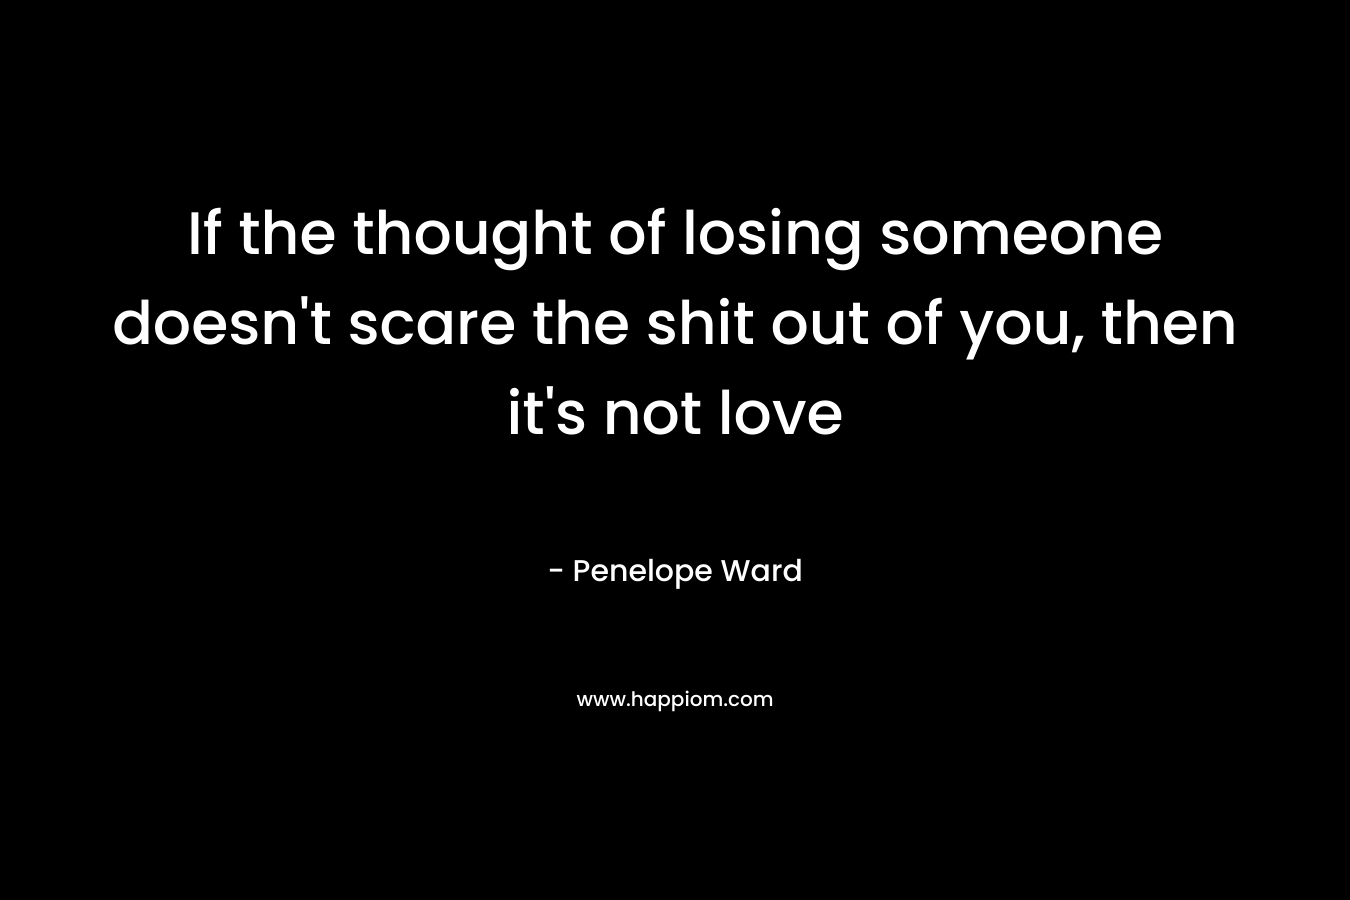 If the thought of losing someone doesn’t scare the shit out of you, then it’s not love – Penelope Ward